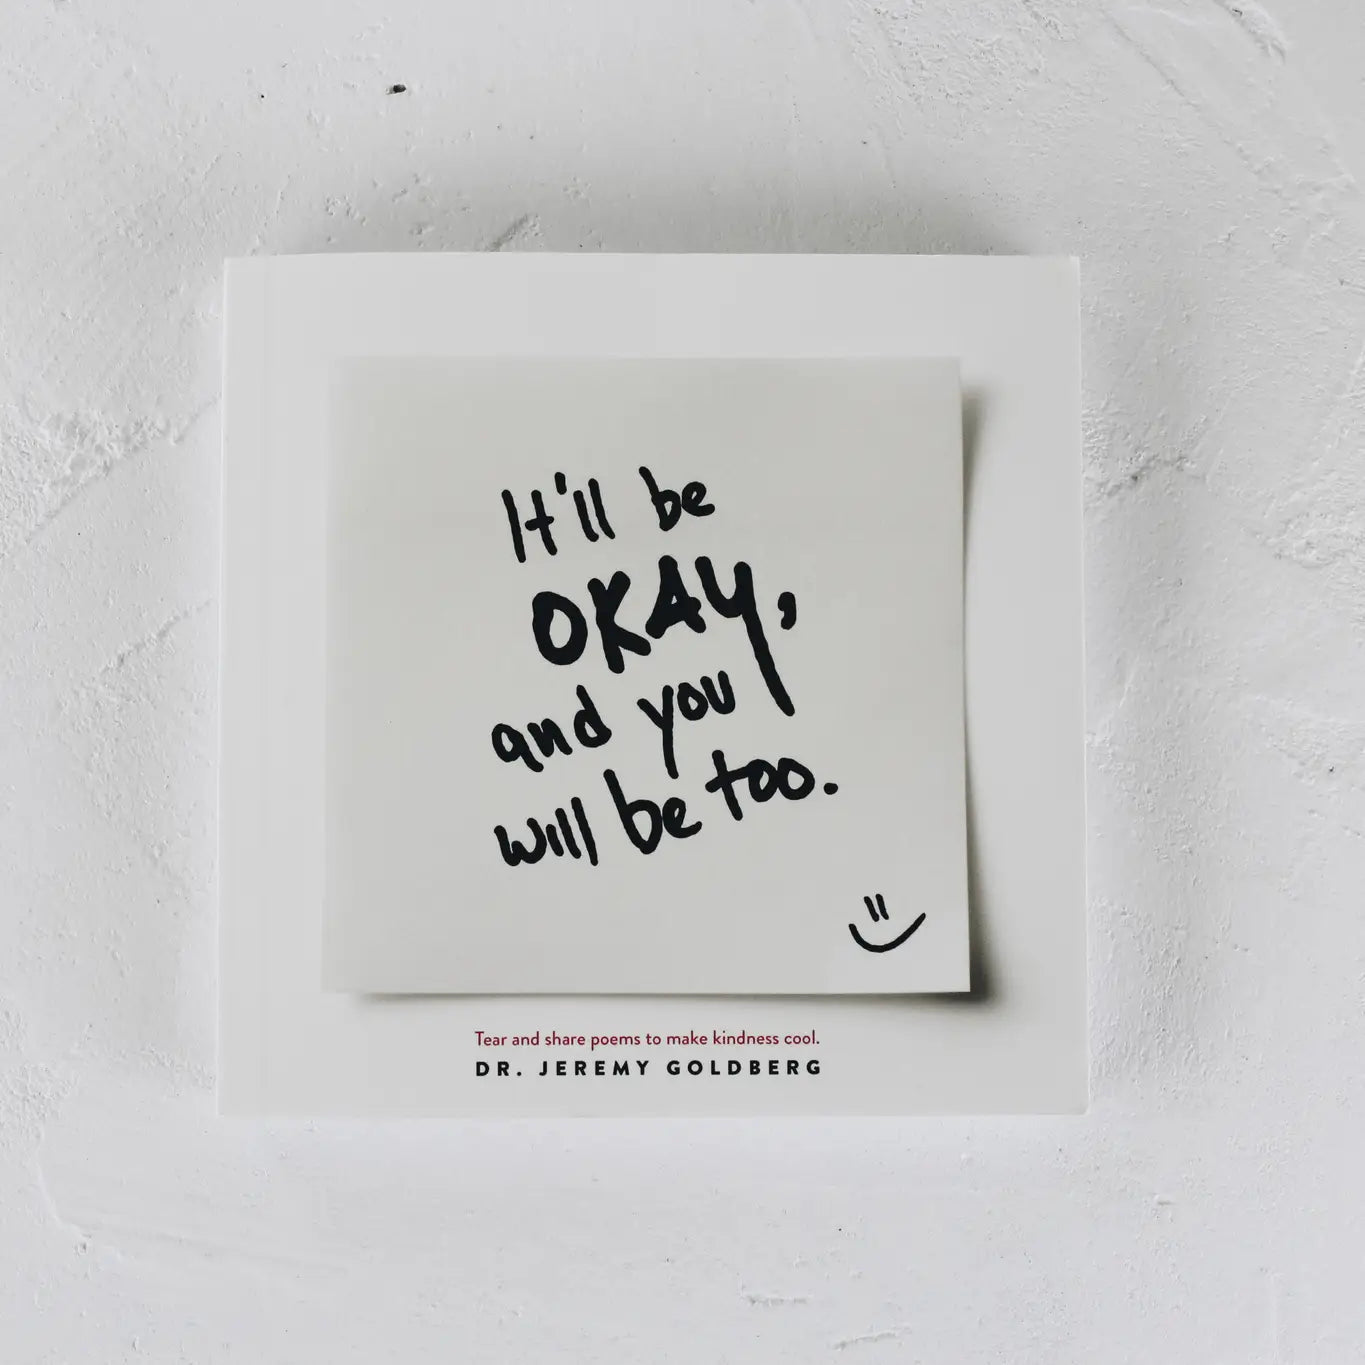 It'll Be Okay, and You Will Be Too - Book - Mindful Living Home